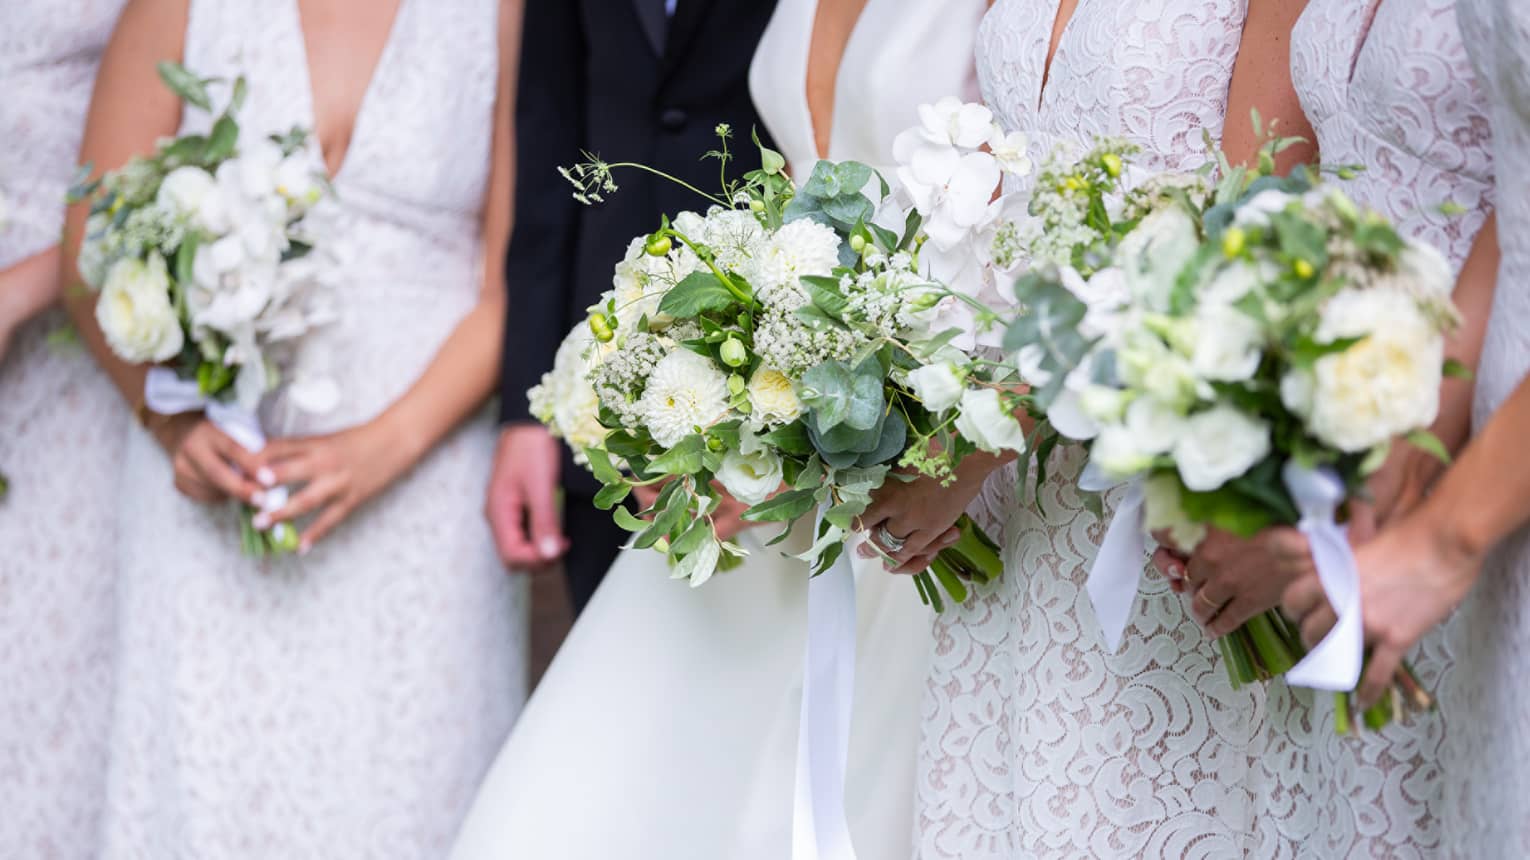 Bride and bridesmaids all wearing white, holding floral wedding bouquets